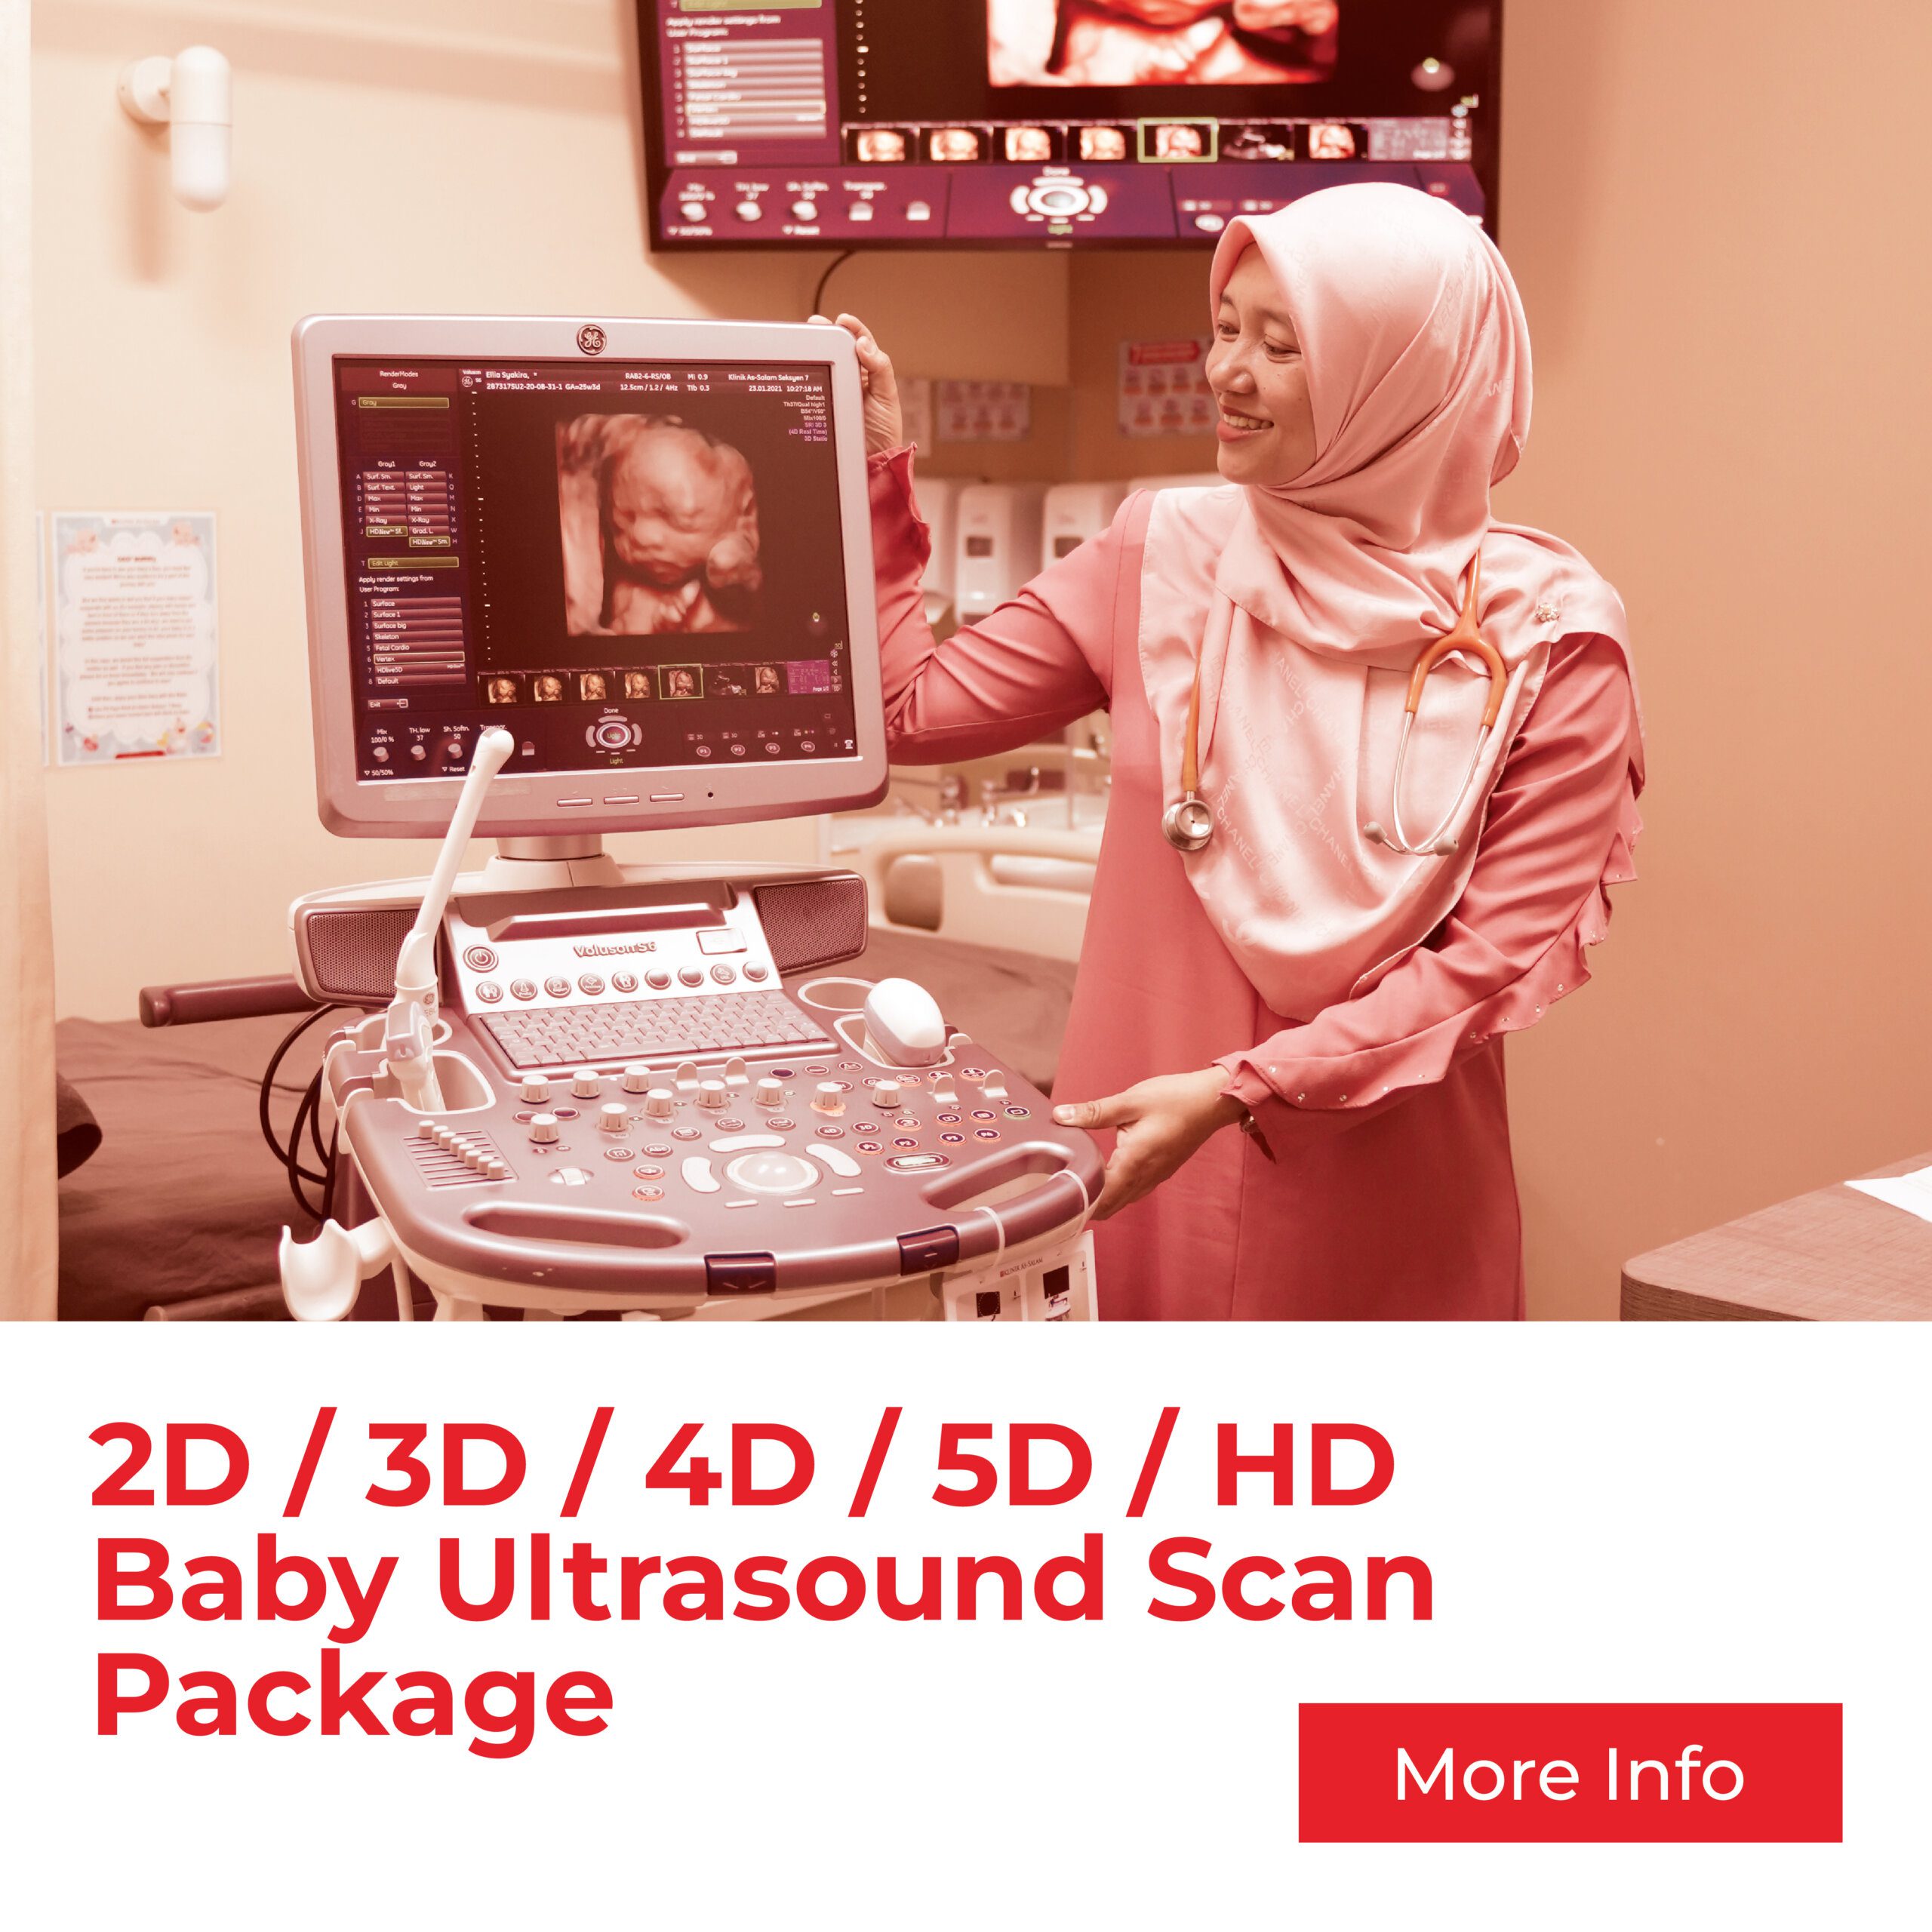 Ultrasound scan baby package & service from Klinik As Salam